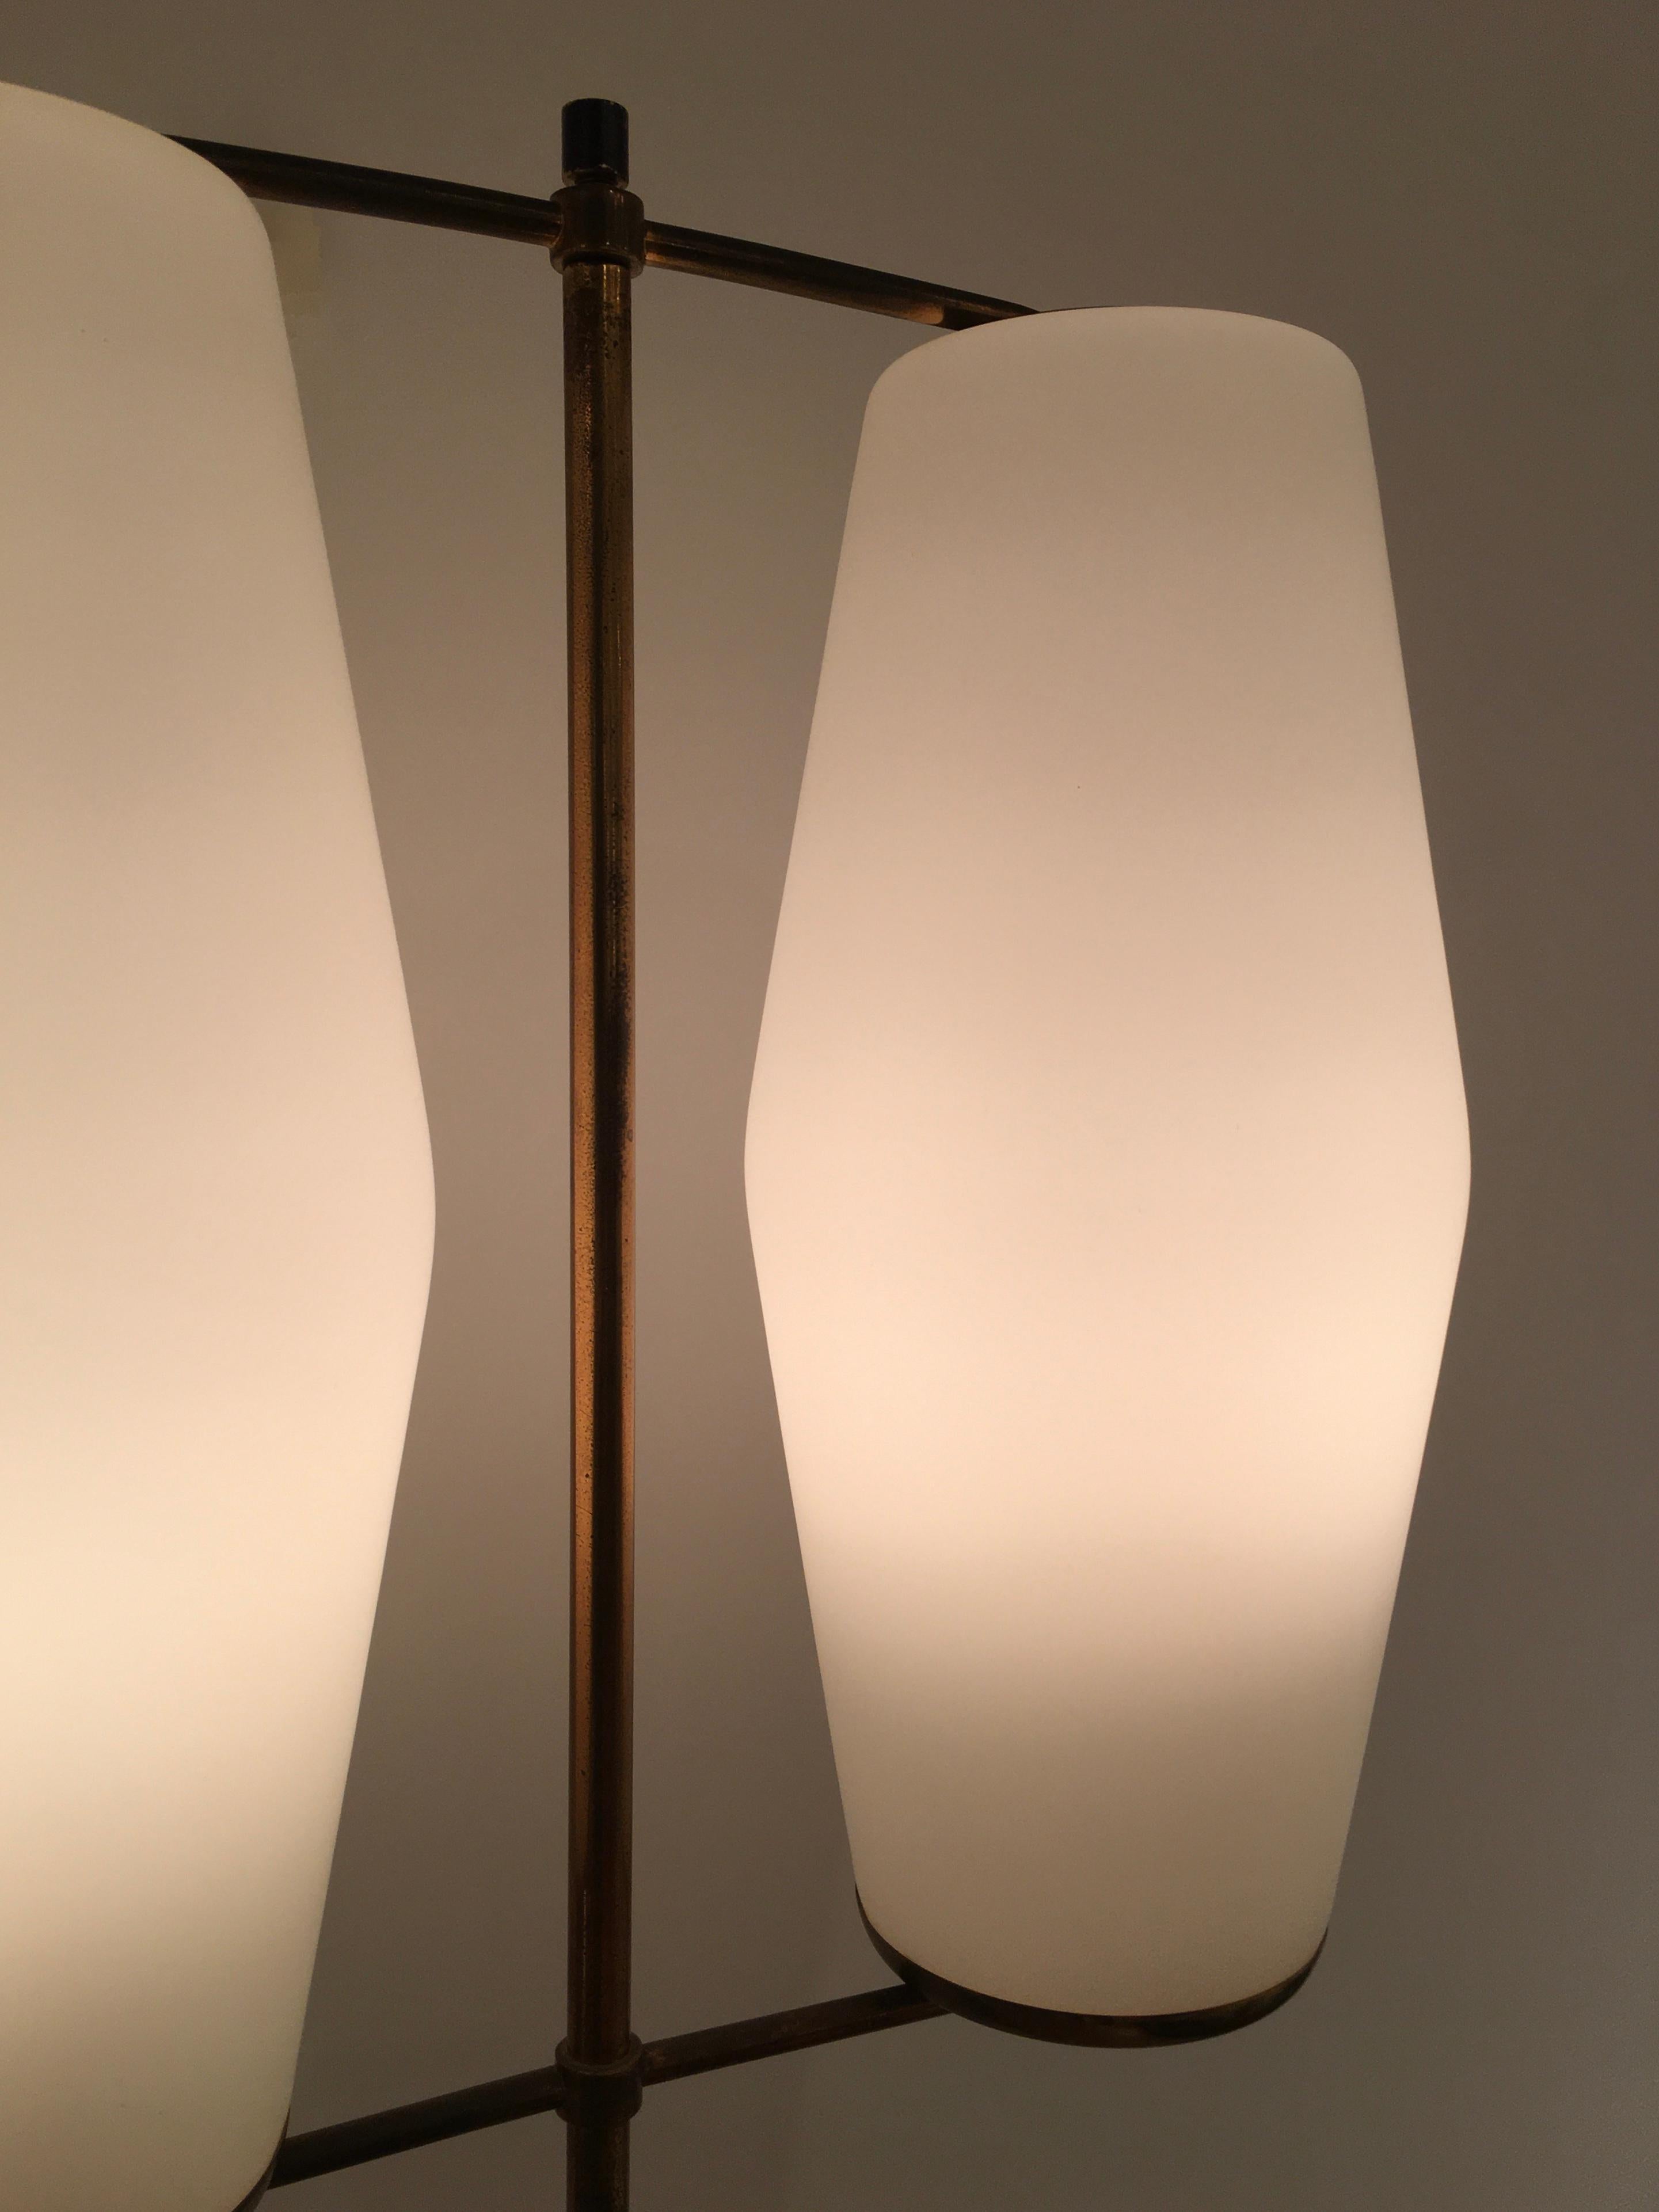 A rare pair of 1950s floor lamps designed and manufactured by Bruno Gatta's innovative lighting company, Stilnovo. Each floor lamp comprises of two opaline glass shades which are held within a double cross-frame made of brass. This is supported by a